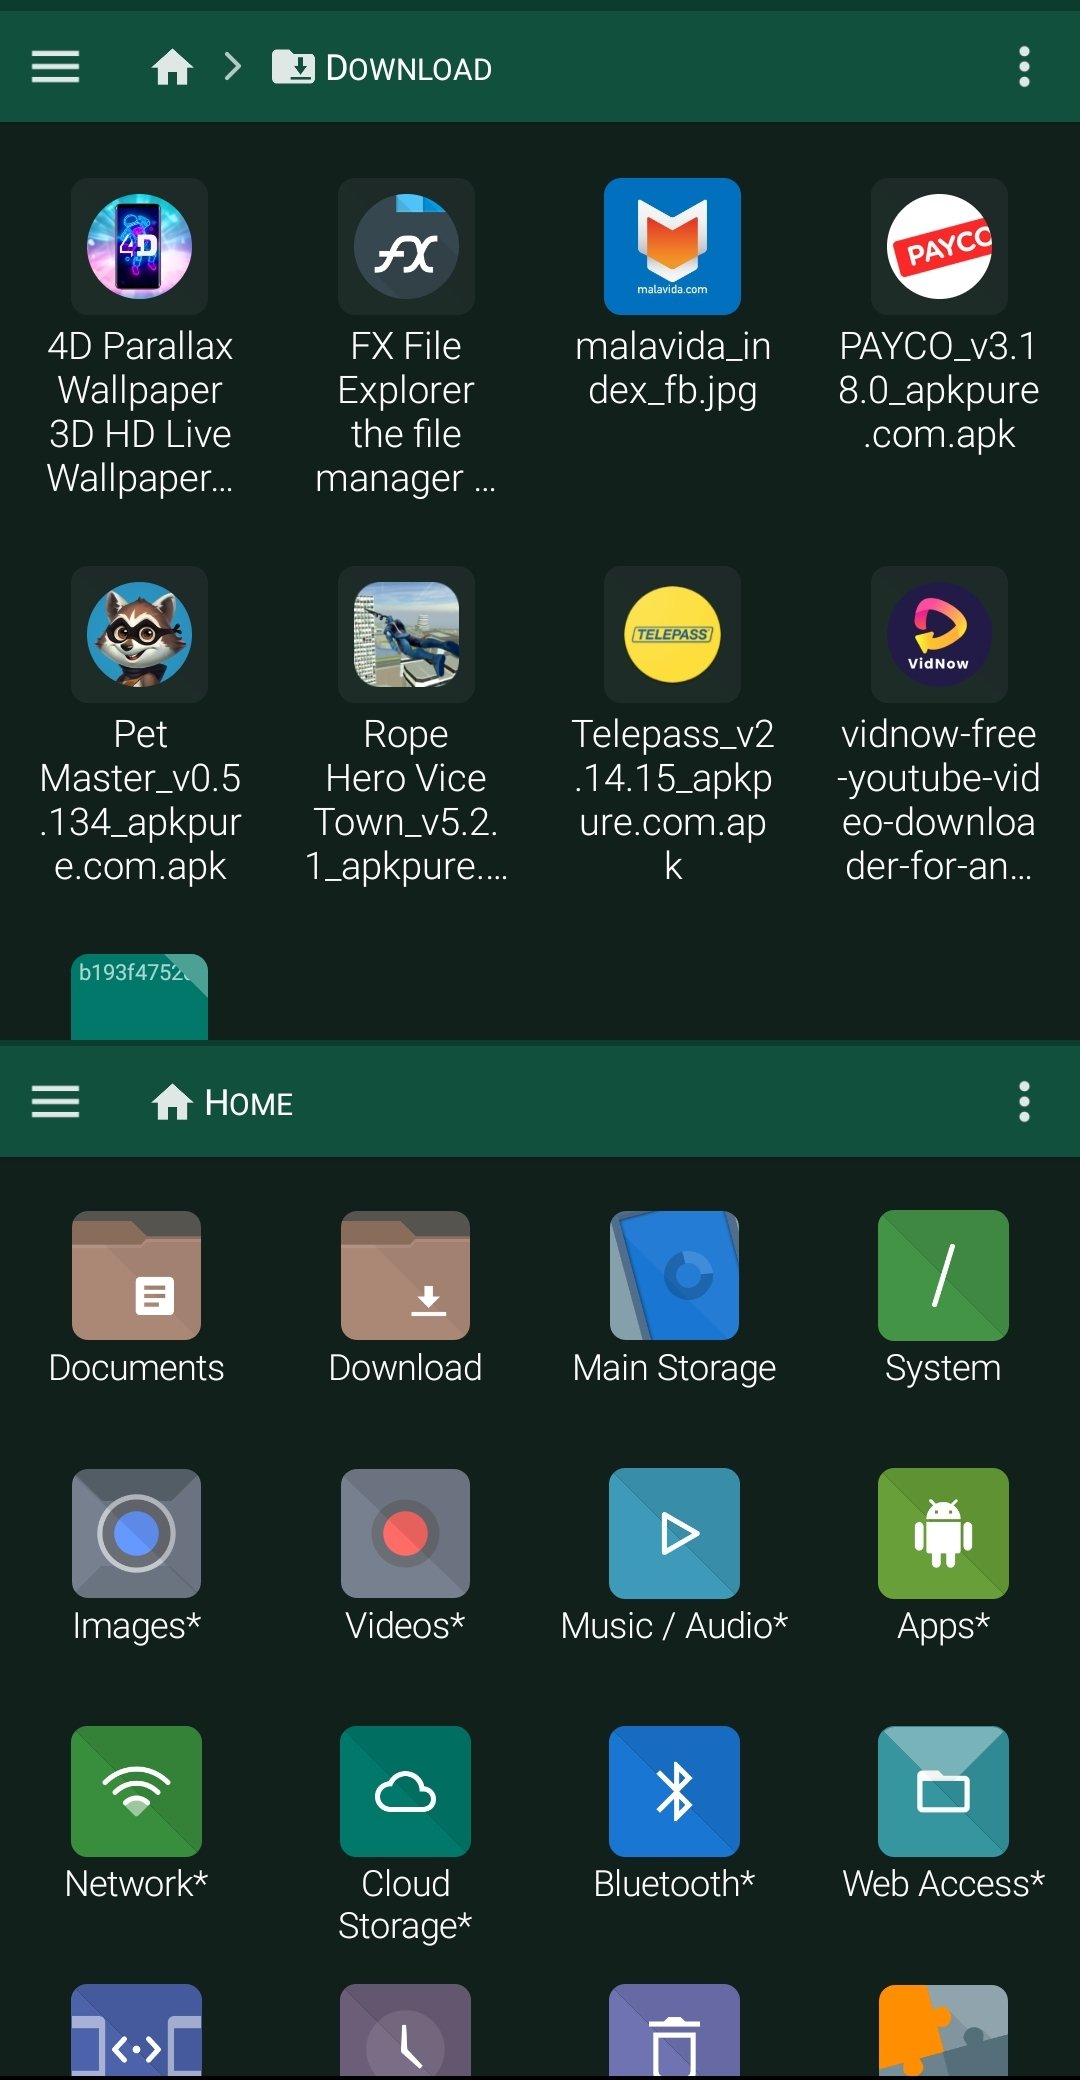 FX File Explorer 8.0.3.0 - Download for Android APK Free